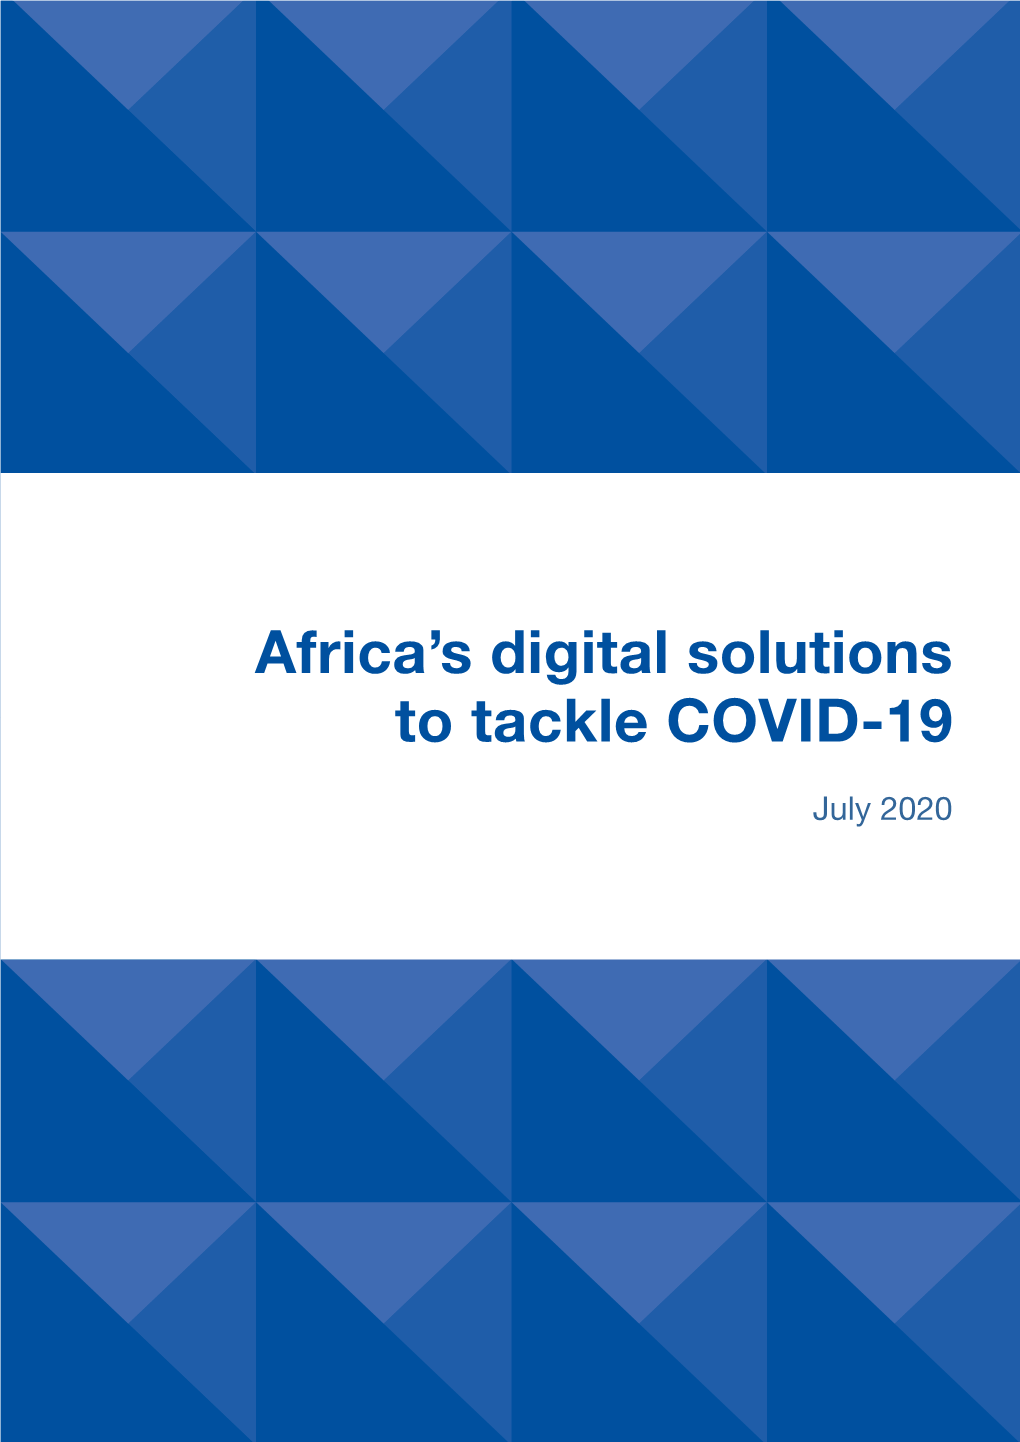 Africa's Digital Solutions to Tackle COVID-19